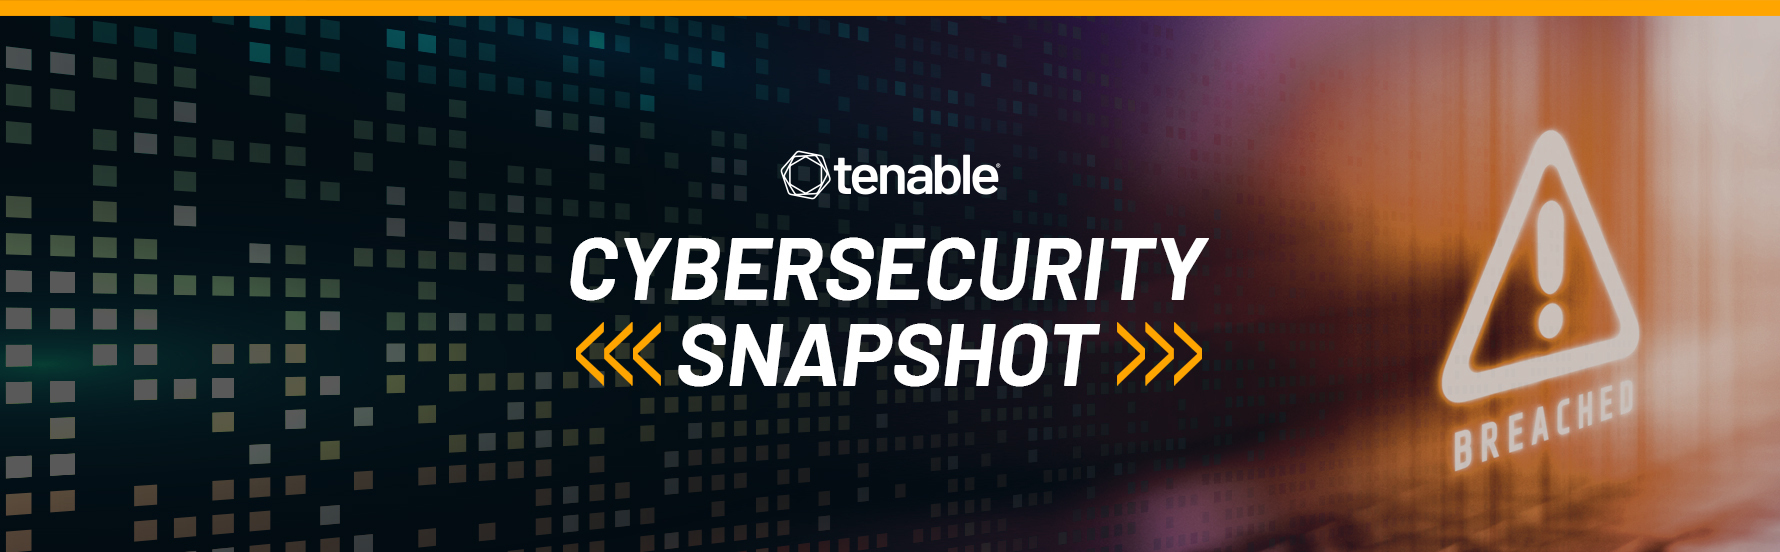 Cybersecurity Snapshot: Insights on Supply Chain Security, Hiring, Budgets, K8s, Ransomware